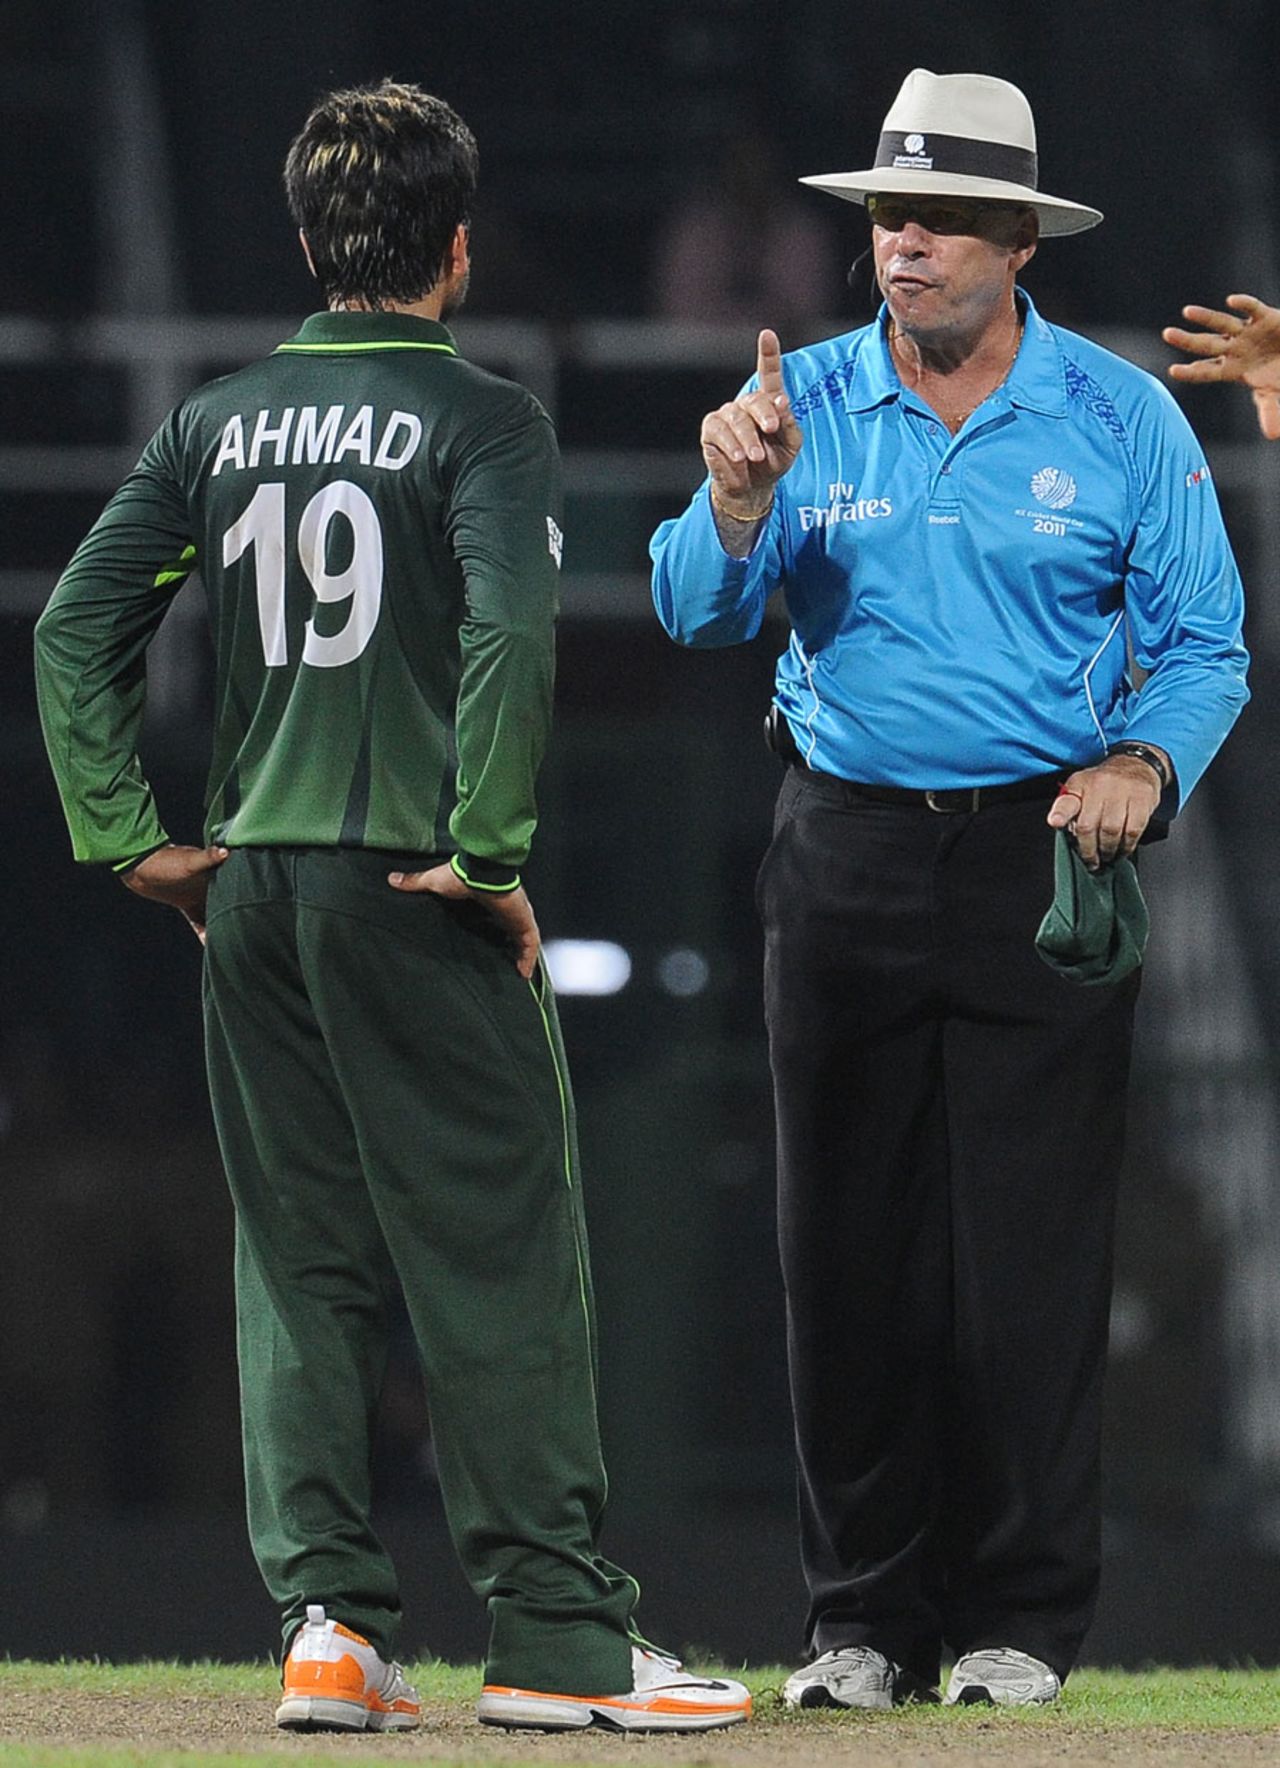 Umpire Daryl Harper warns Ahmed Shehzad not to talk too much to the batsman, Canada v Pakistan, Group A, World Cup 2011, Colombo, March 3, 2011